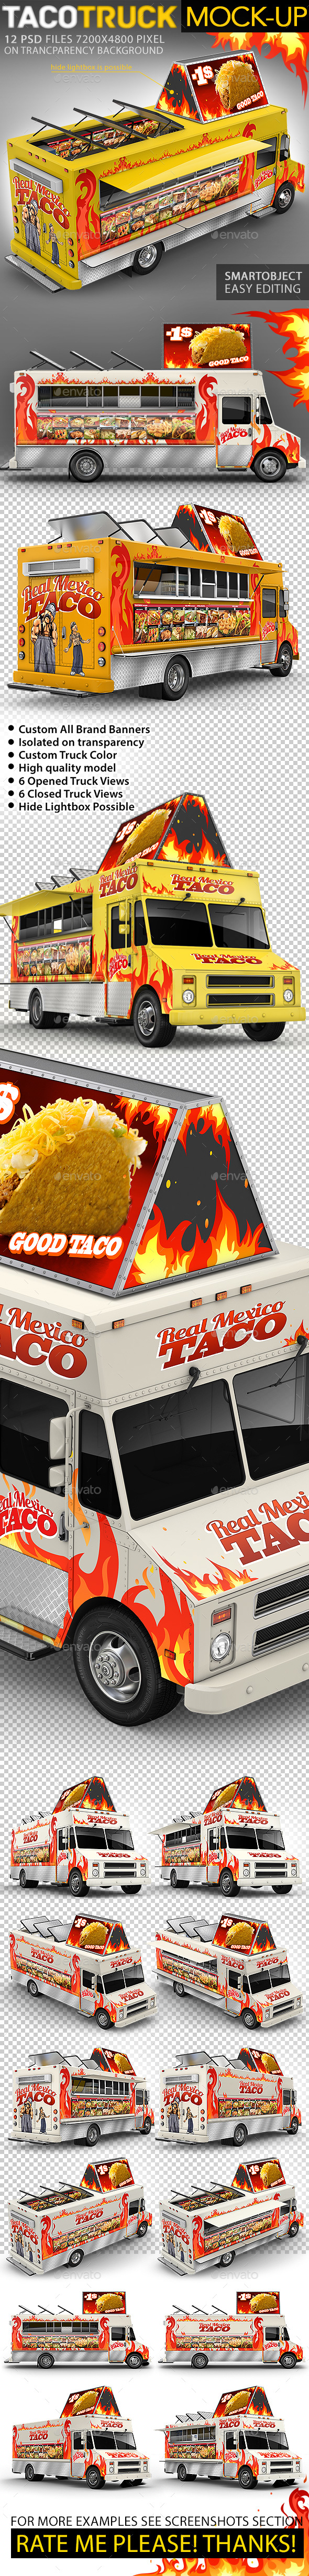 Download Food Truck, Taco Truck, Step Van Mock-Up by Bennet1890 | GraphicRiver